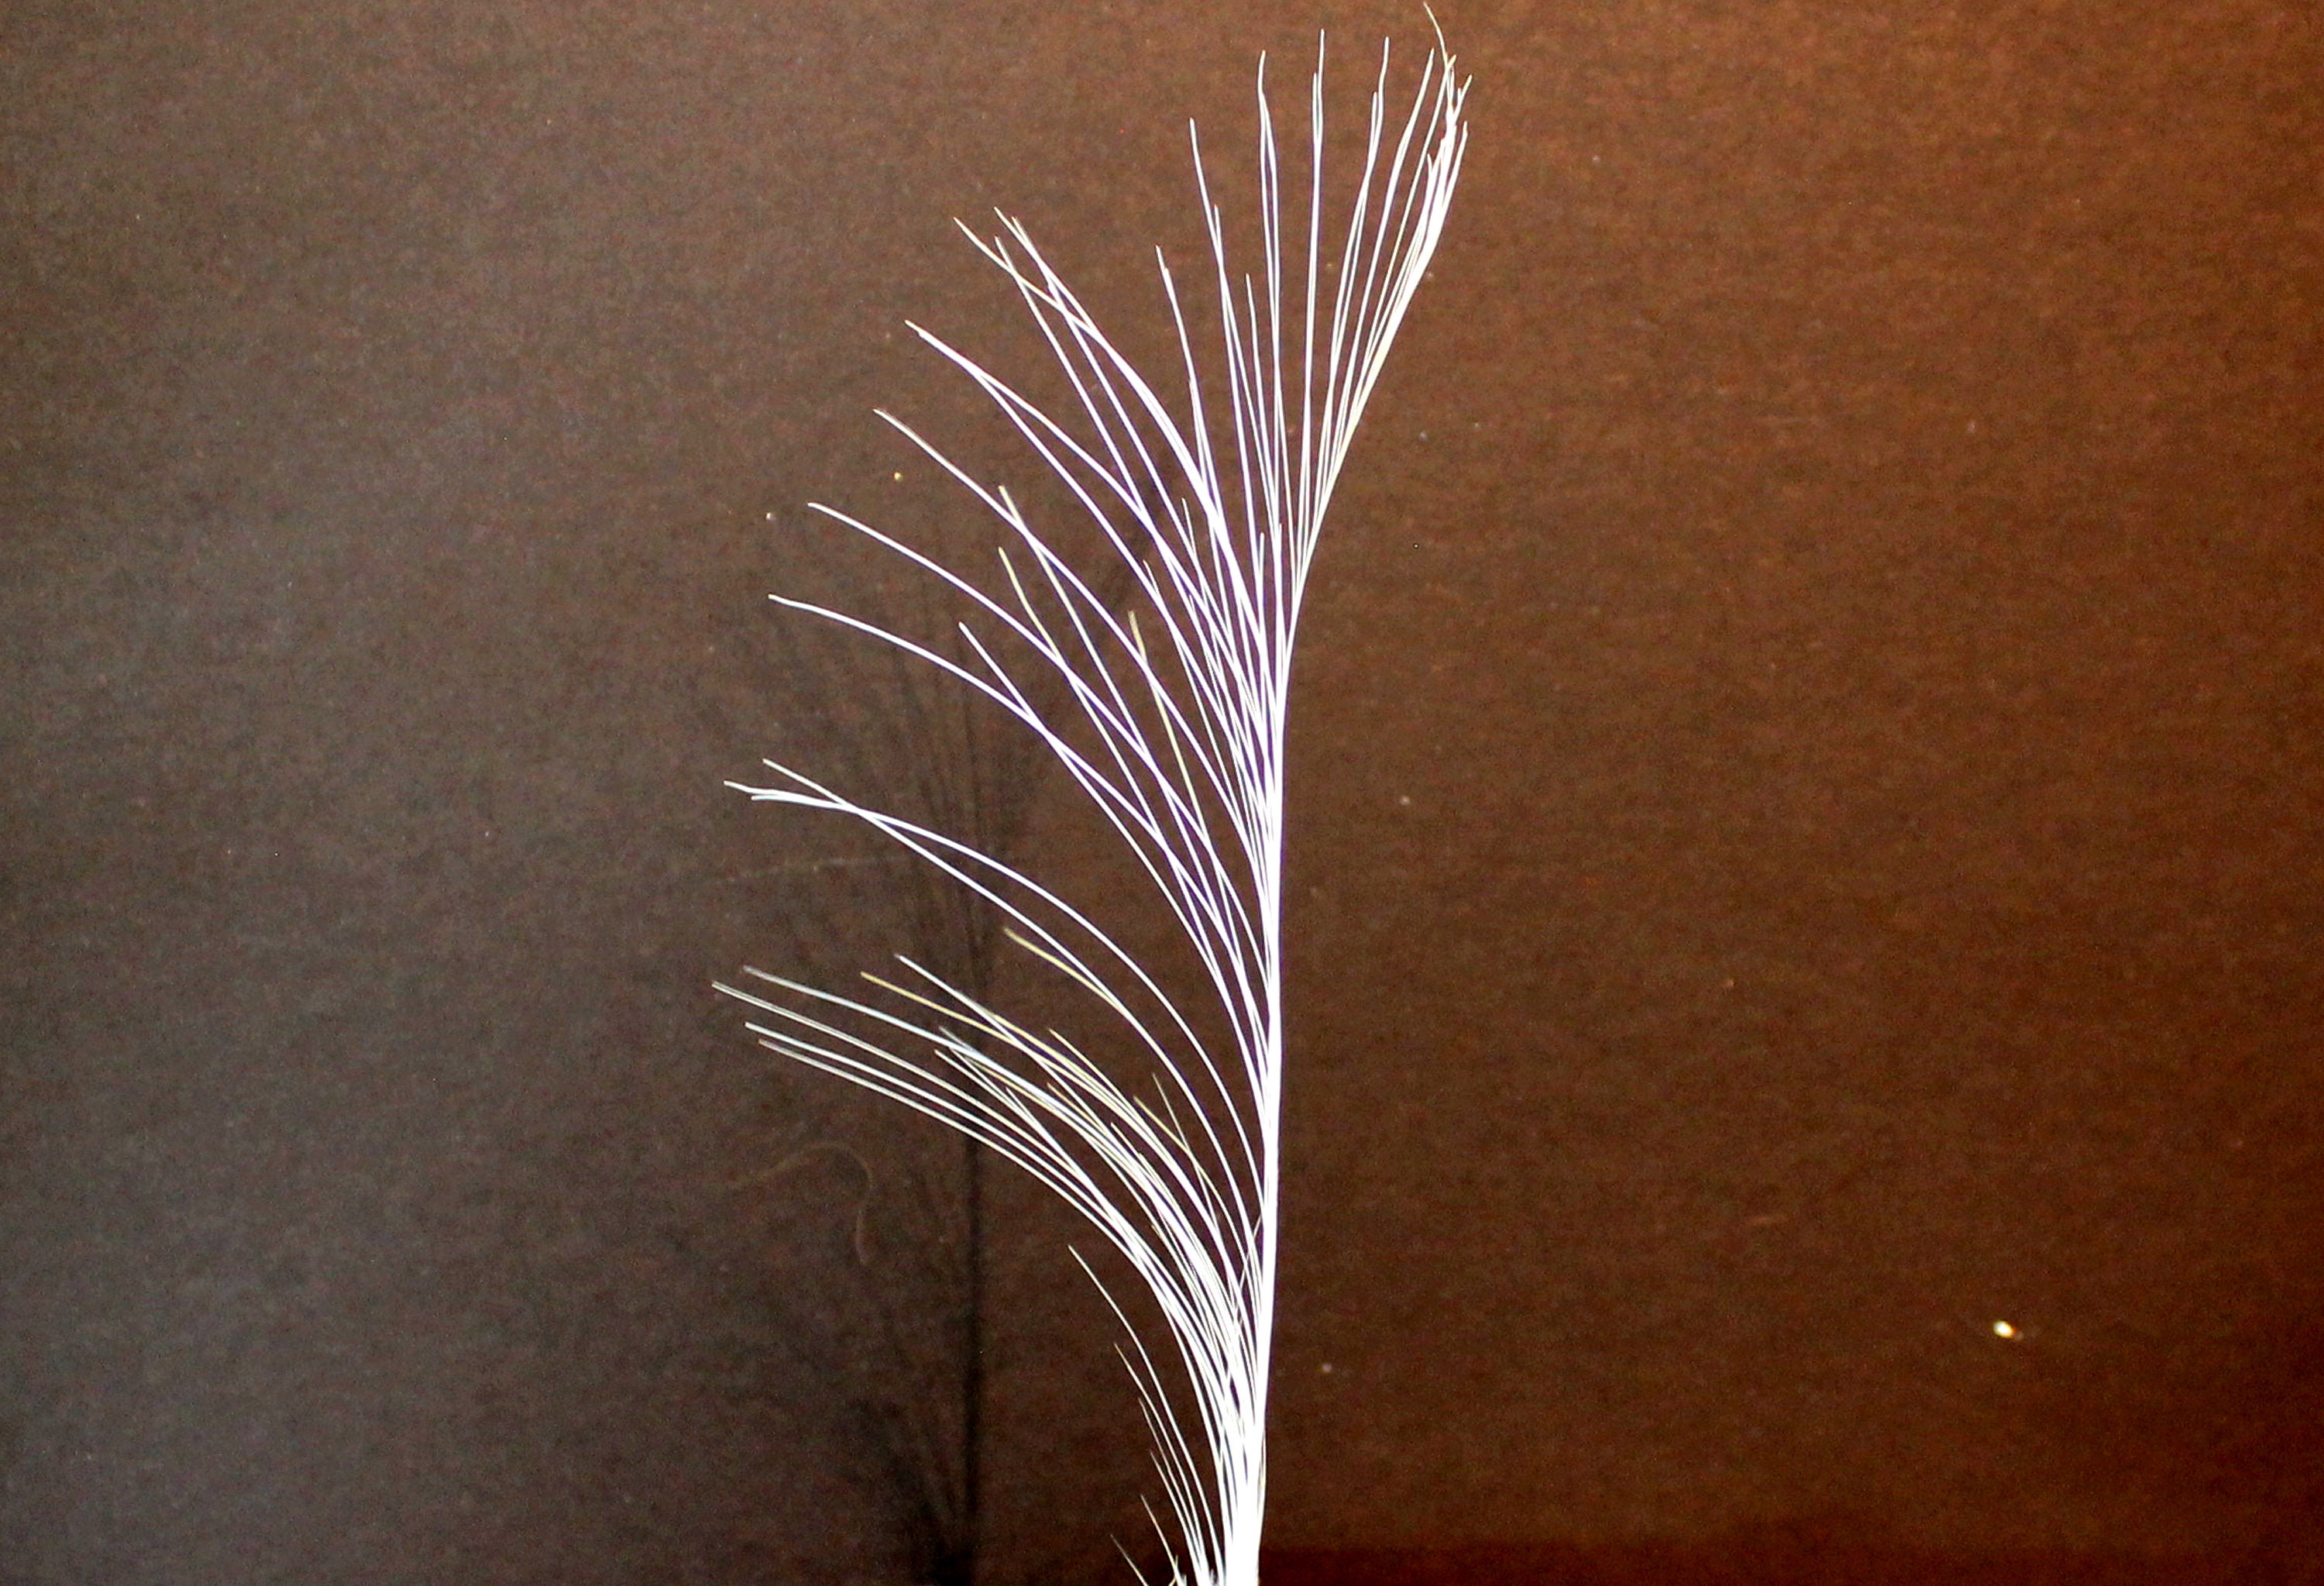 Vintage Feathers for Crafting or Hat Making. Feather for a Quill